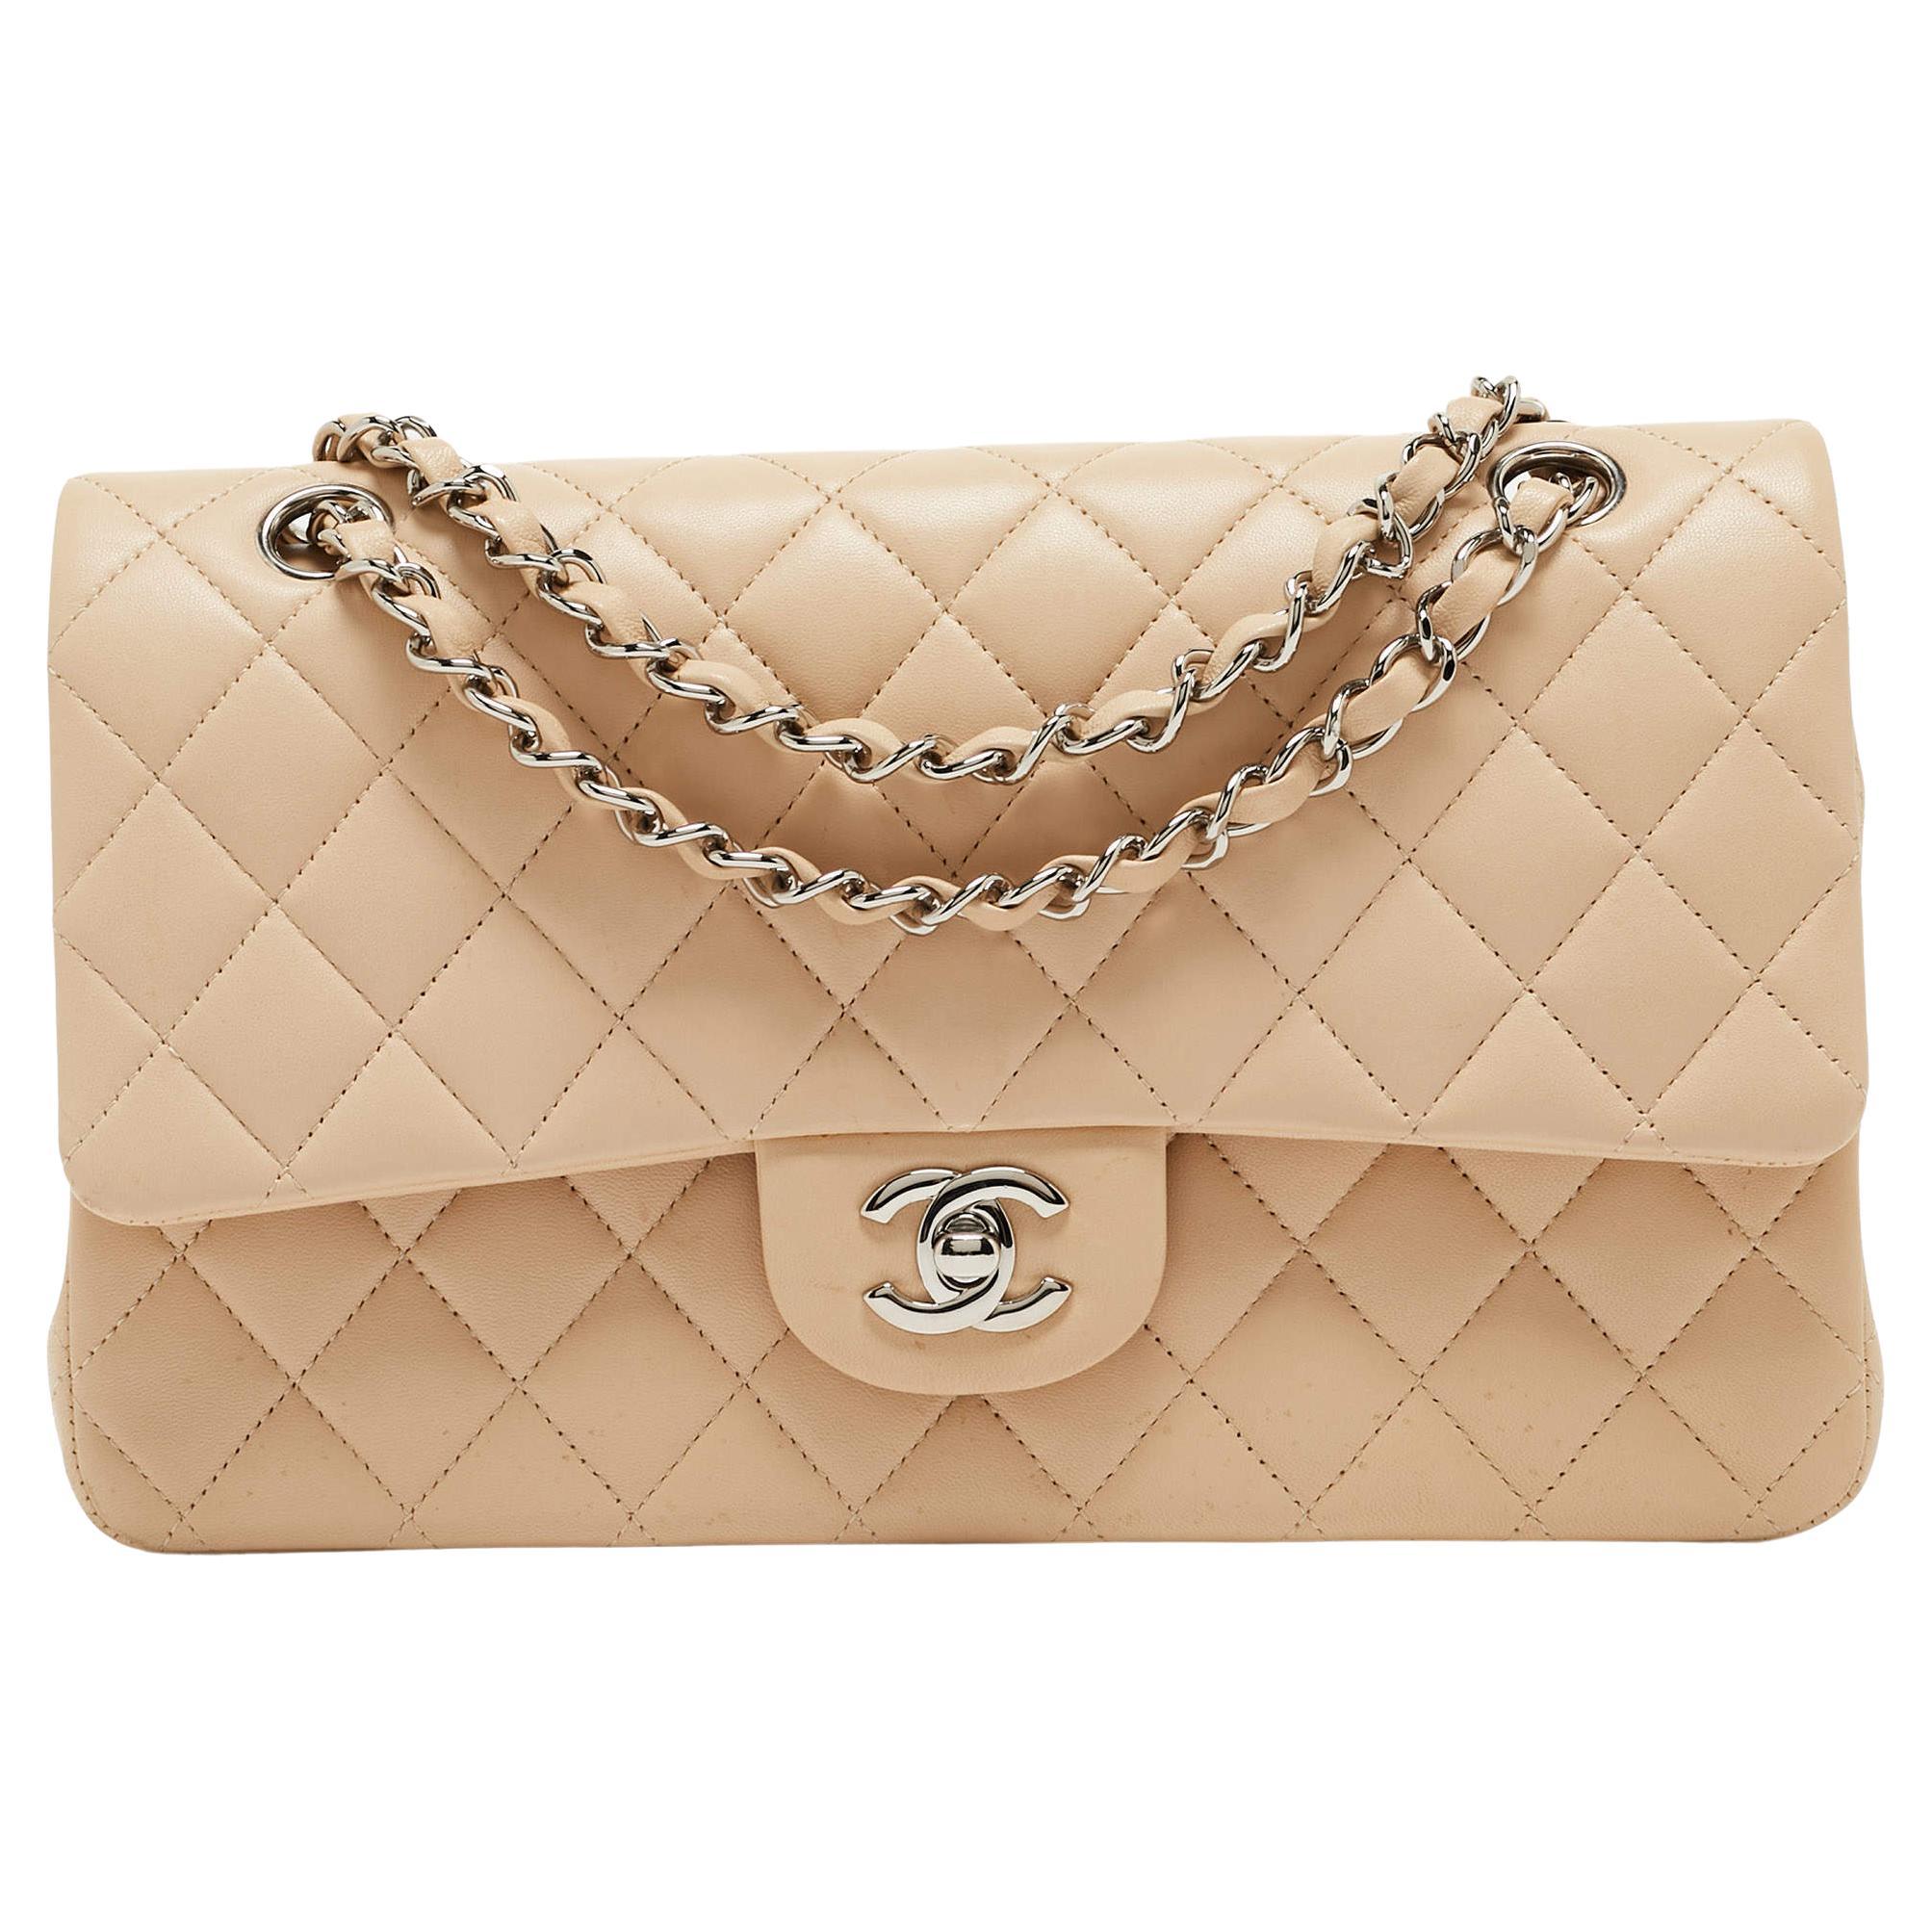 Chanel Beige Quilted Leather Medium Classic Double Flap Bag